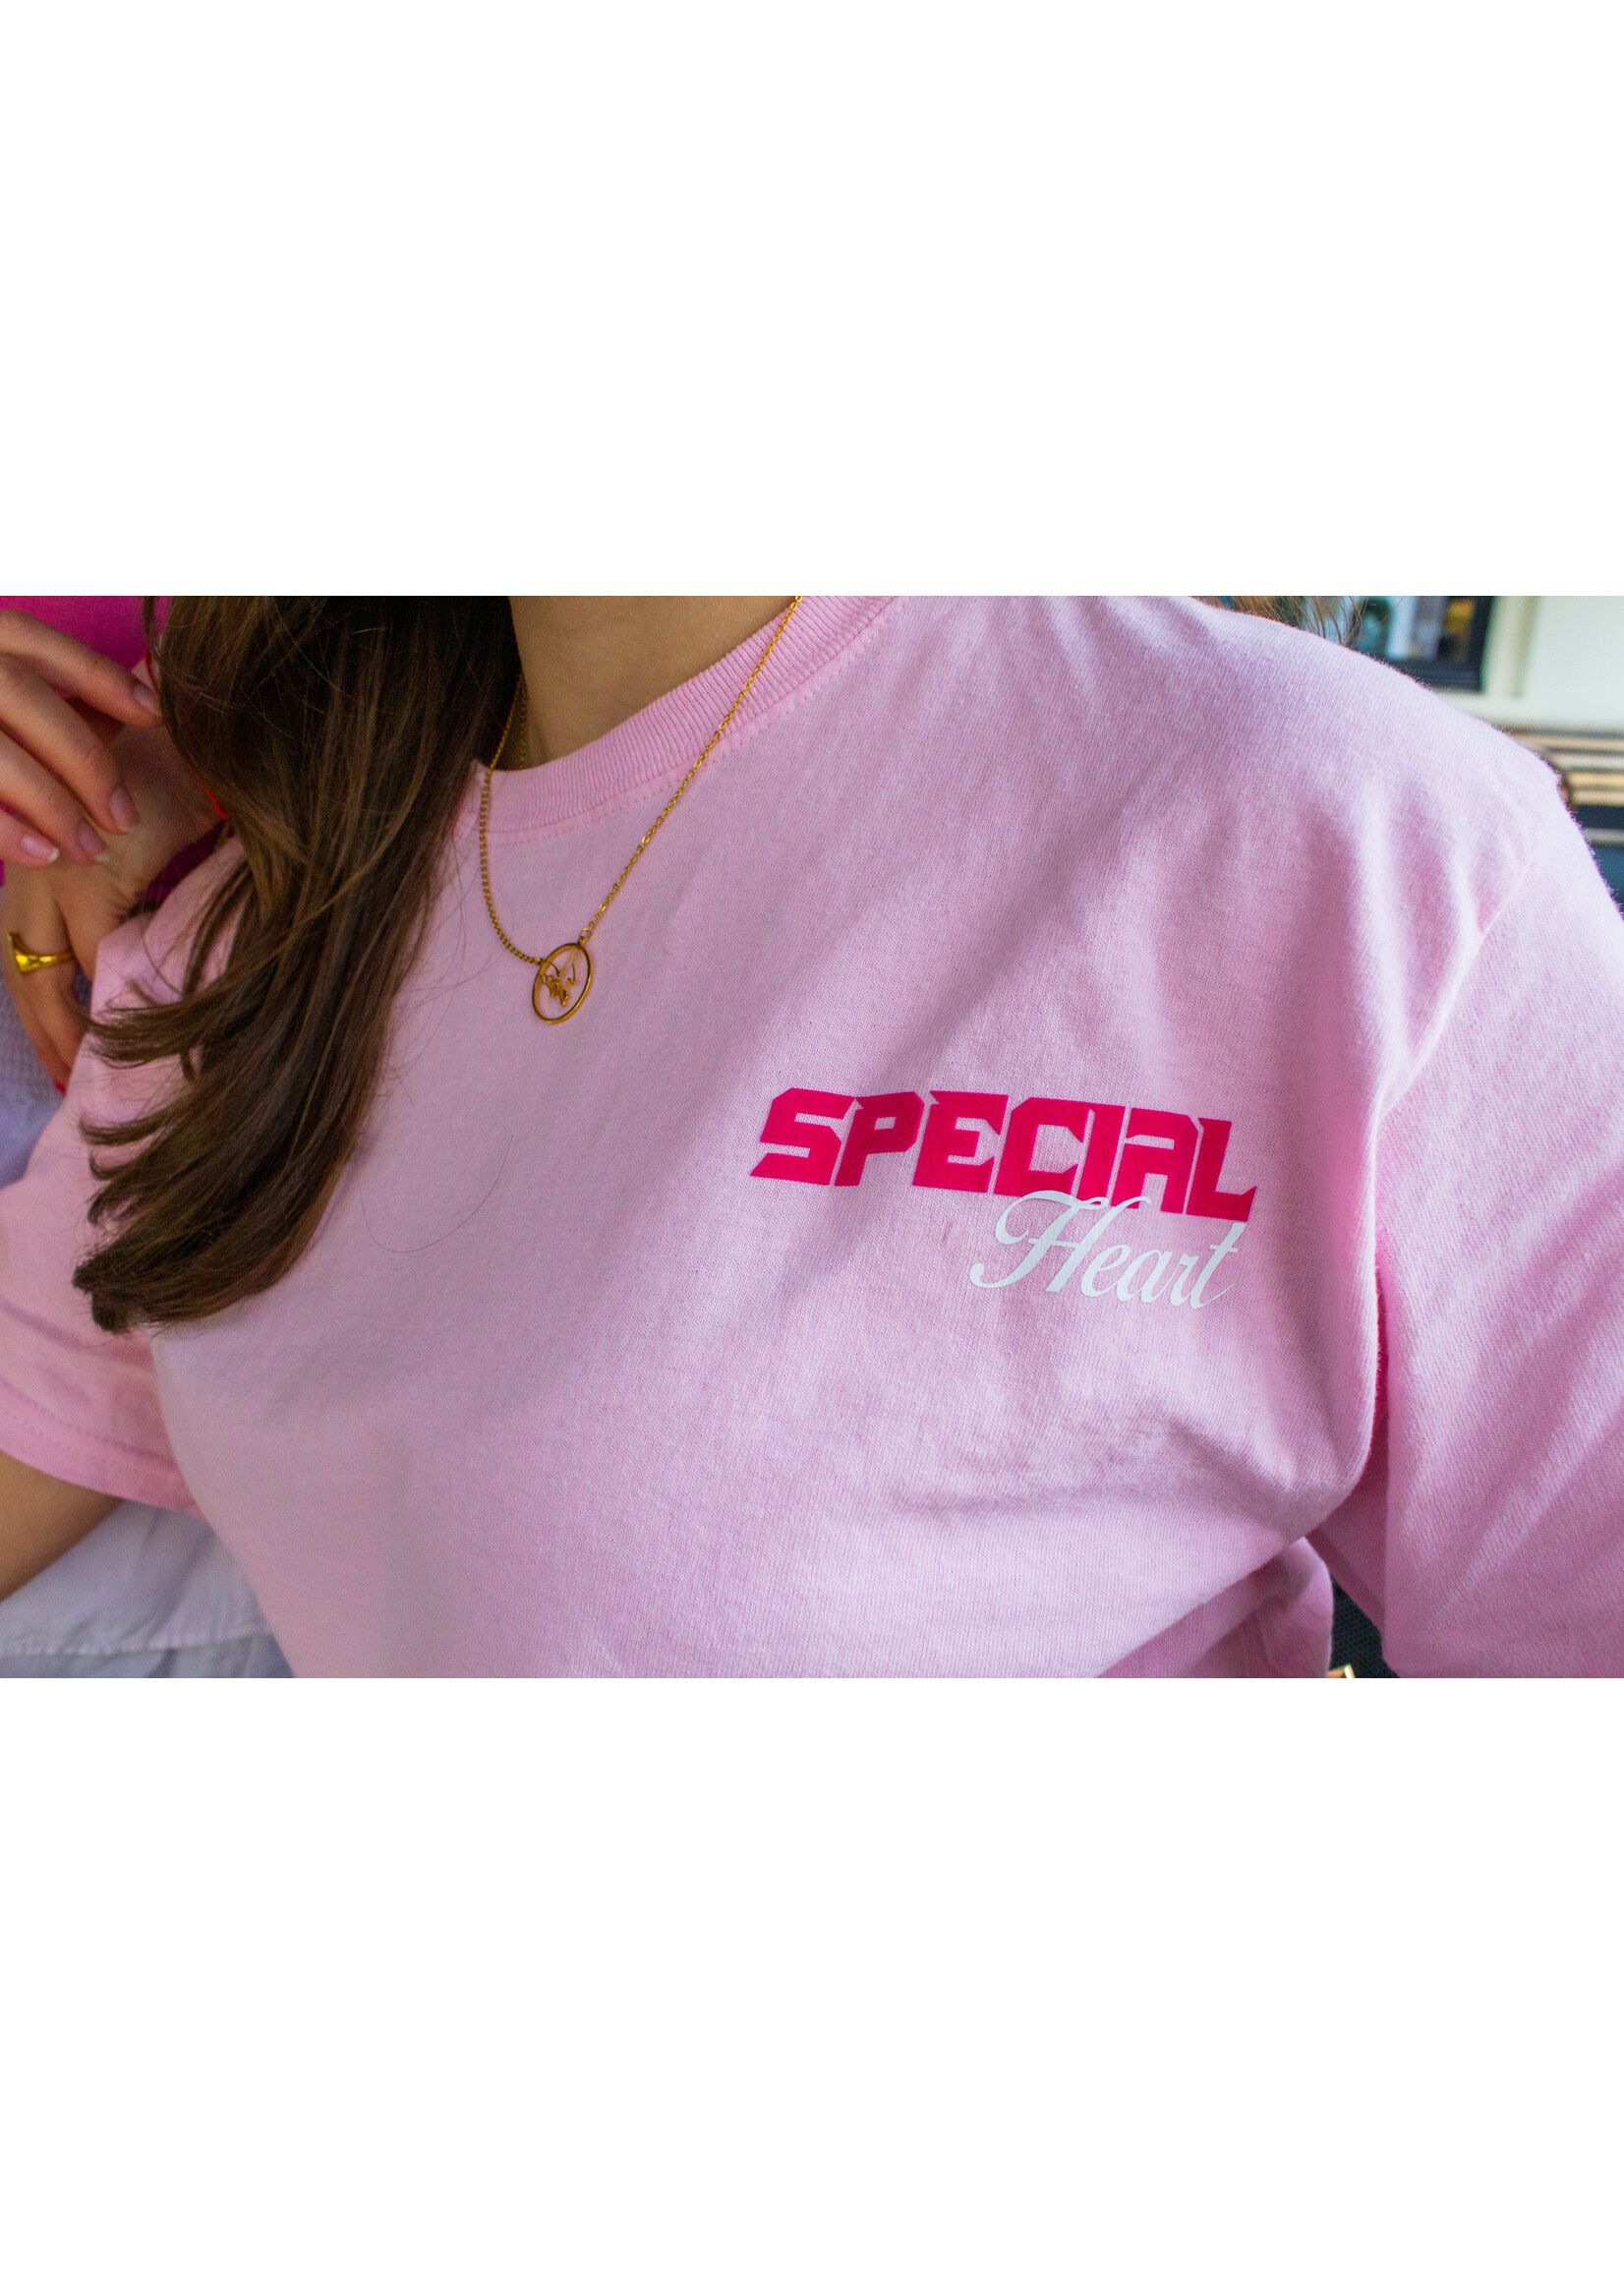 YOU ARE SPECIAL "Special Heart" Light Pink T-shirt